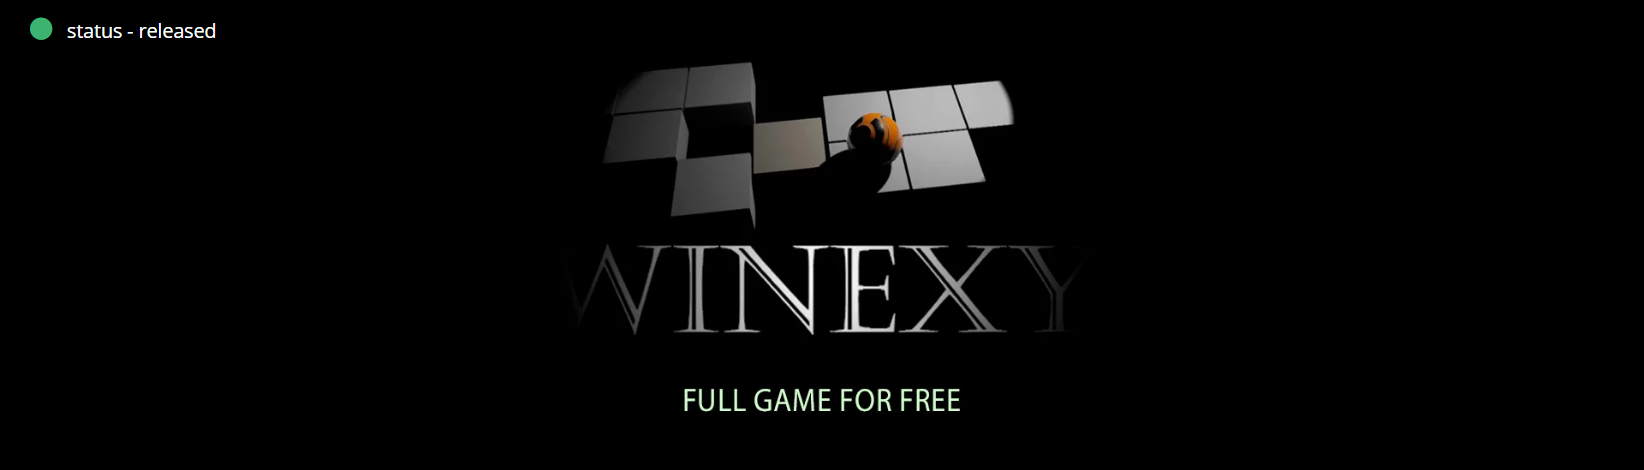 Screenshot_2019-08-25 Winexy Indiegala Developers.png